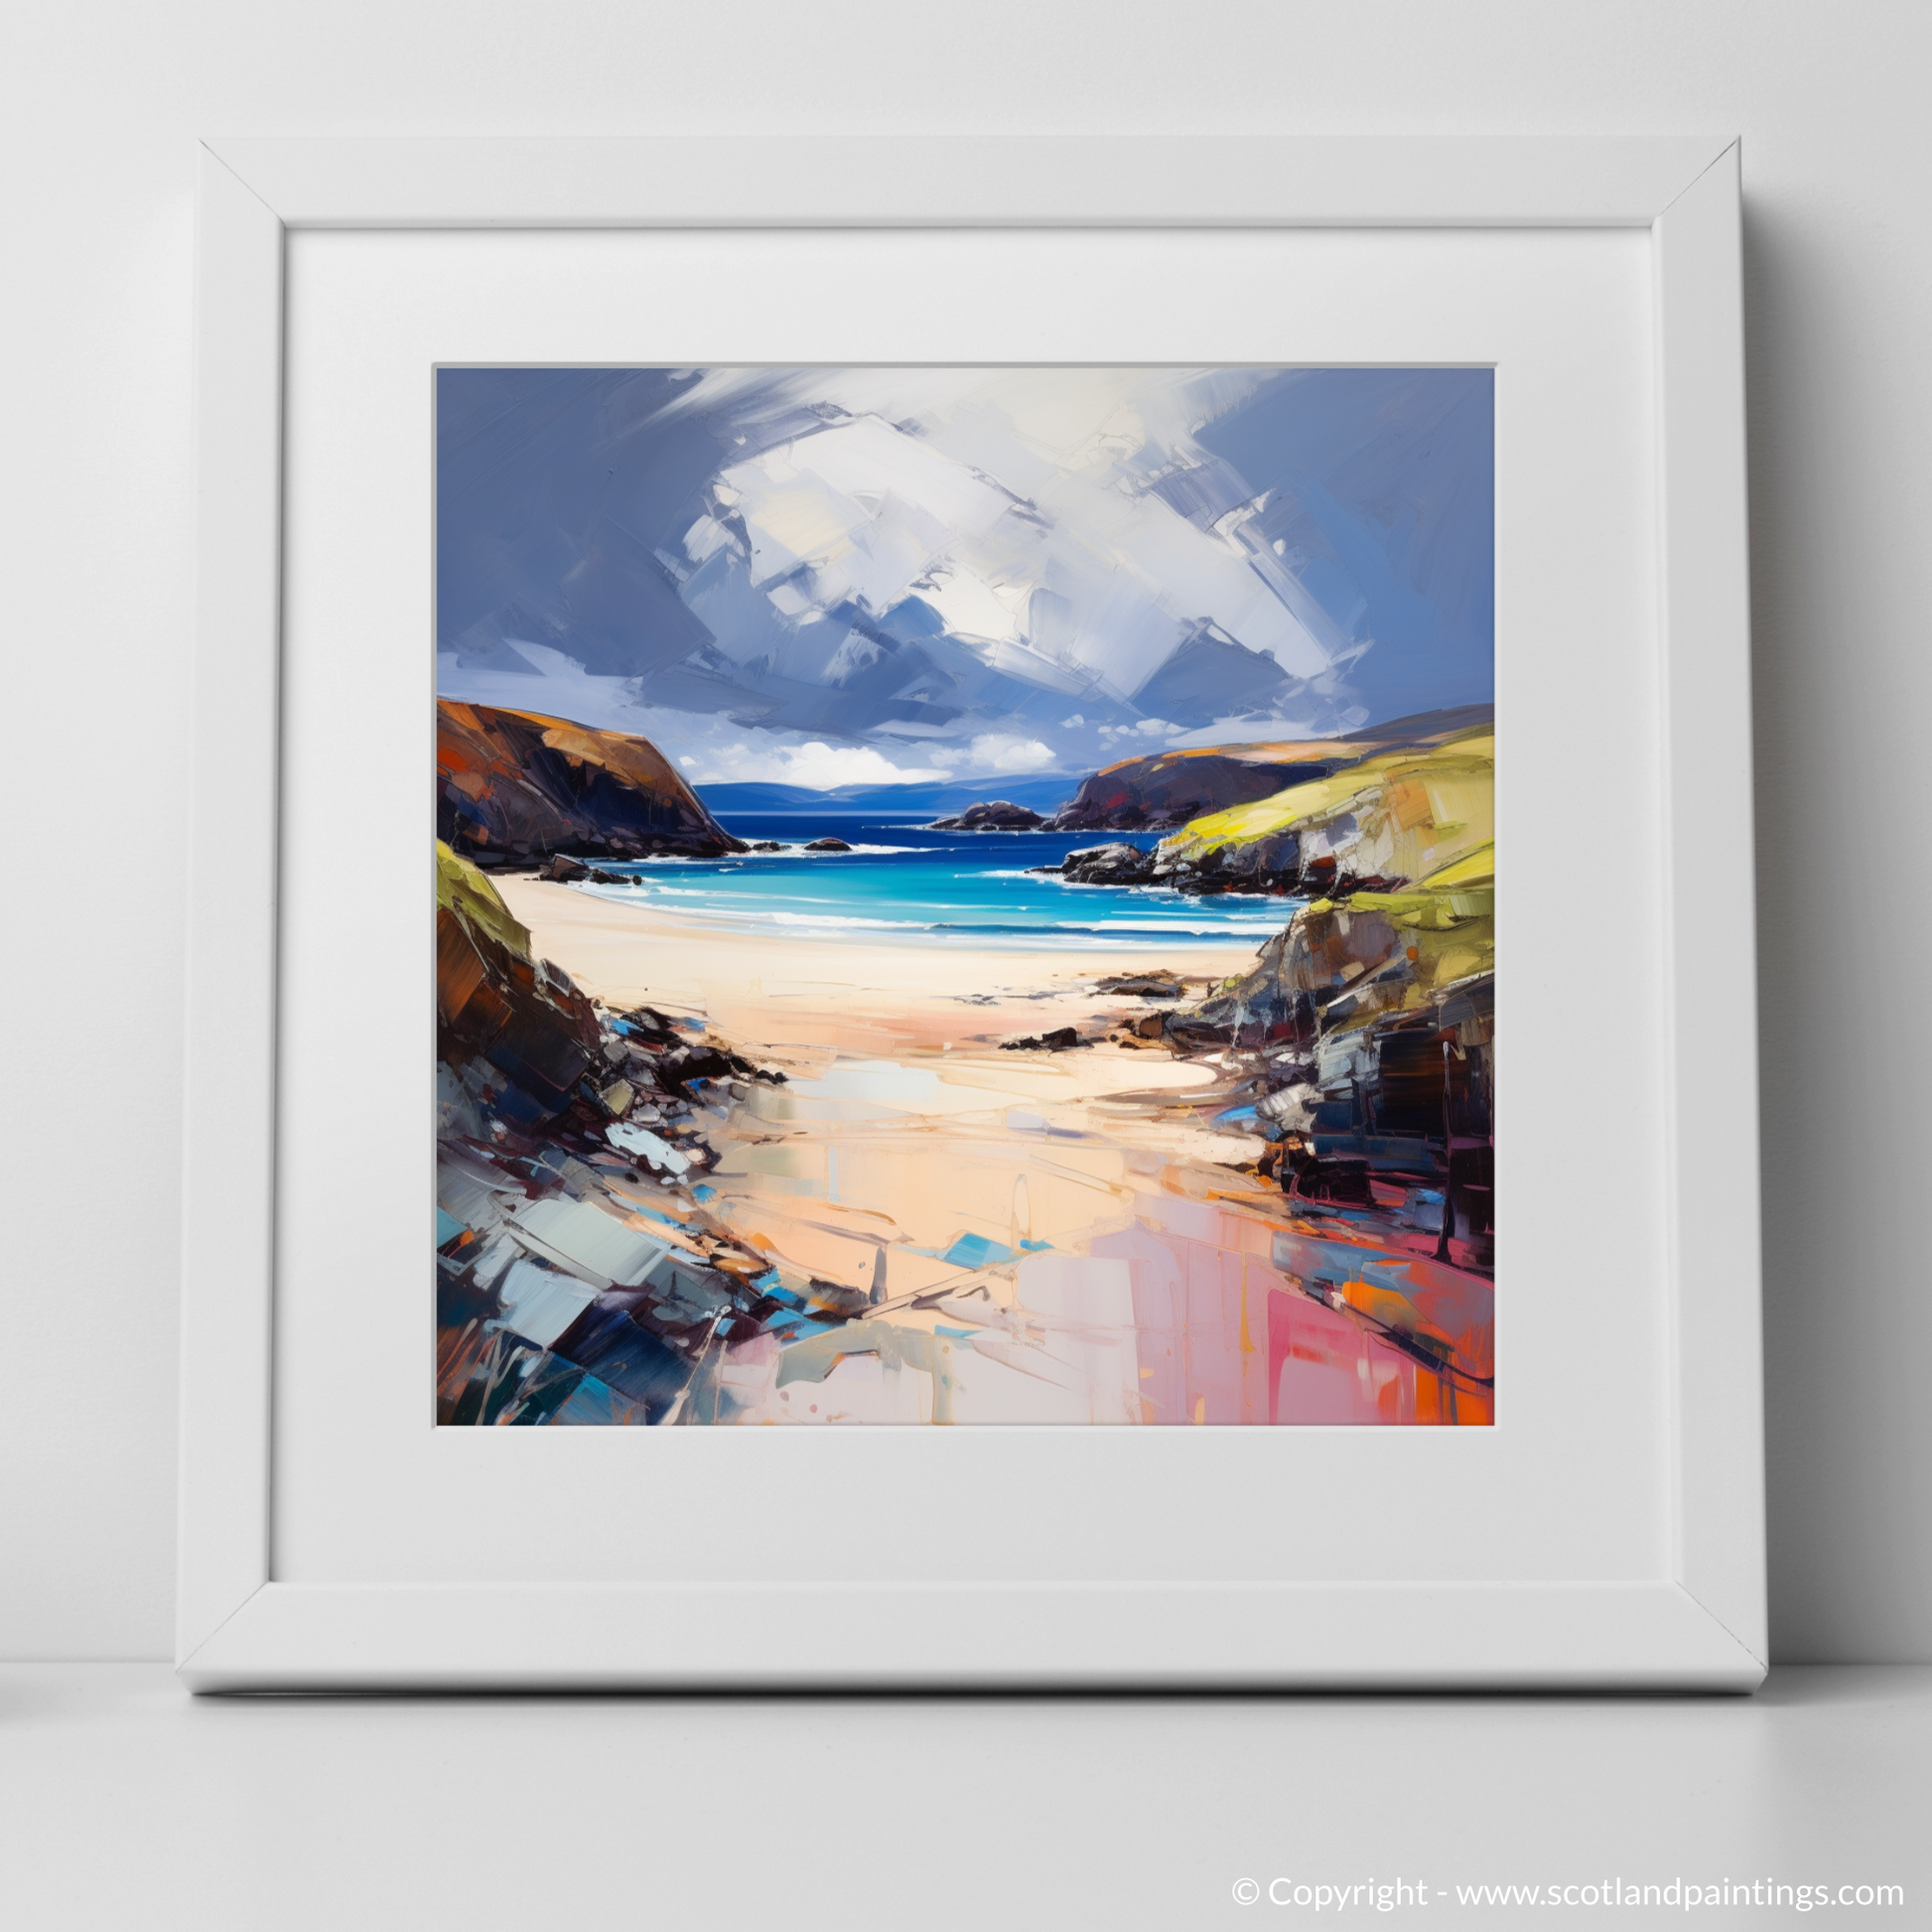 Art Print of Balnakeil Bay, Durness, Sutherland with a white frame